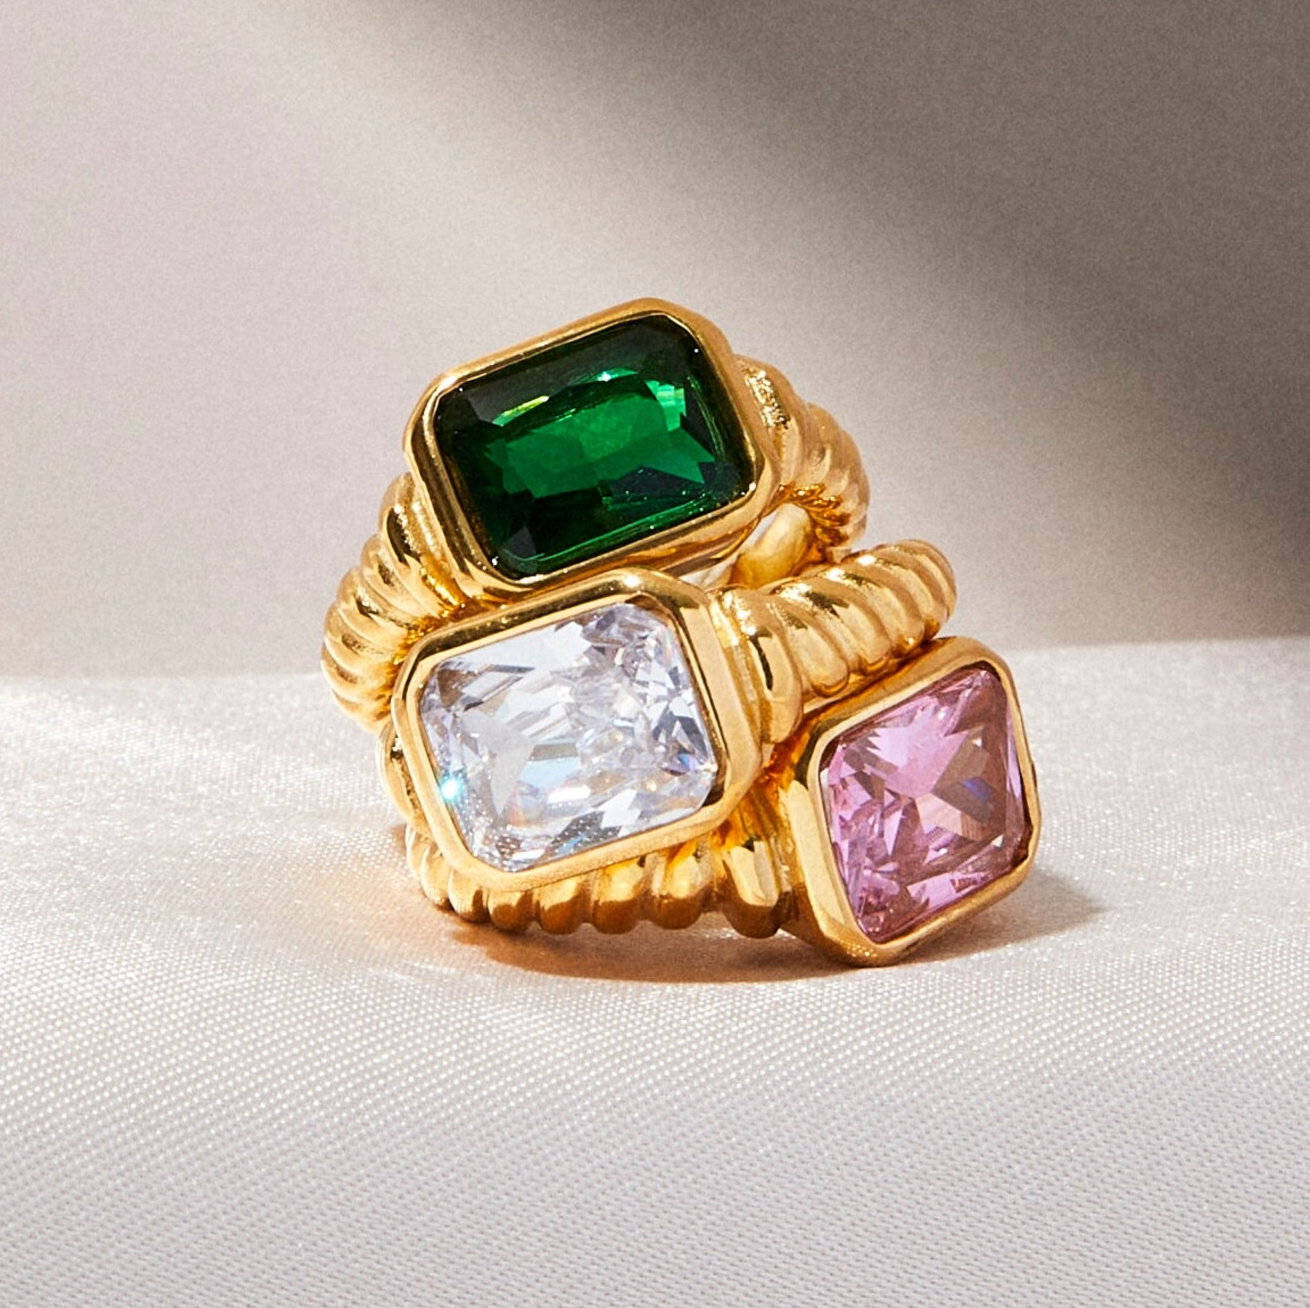 gold twist band rings with large stones in green, clear, and pink